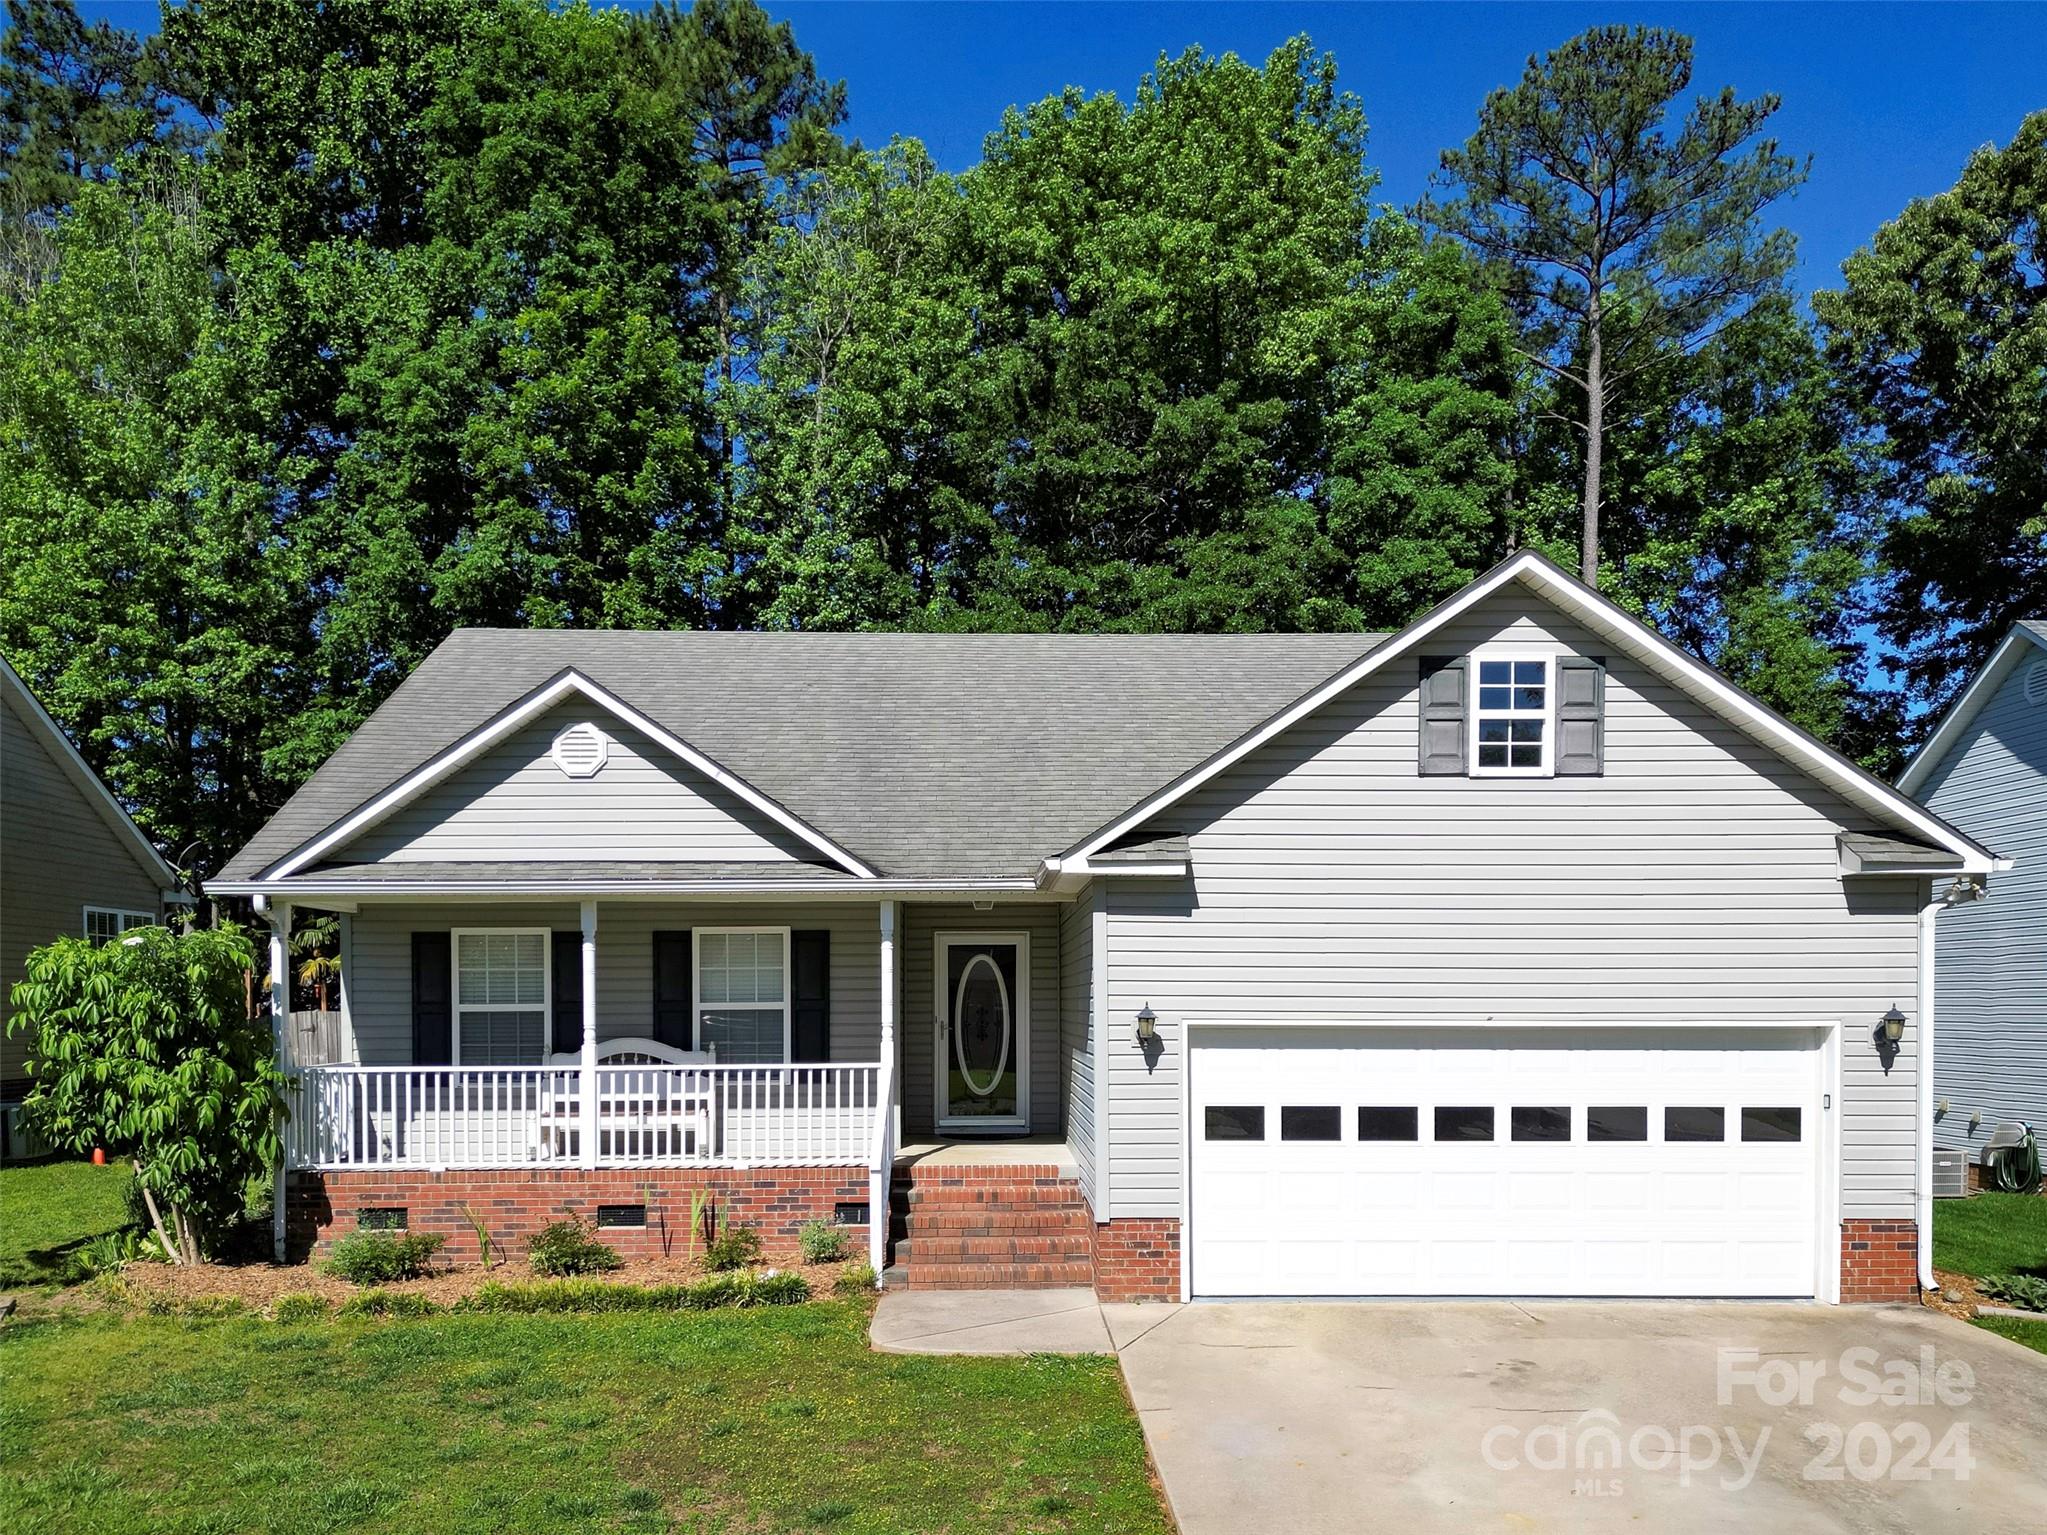 789 Painted Lady Court, Rock Hill, SC 29732, MLS # 4135208